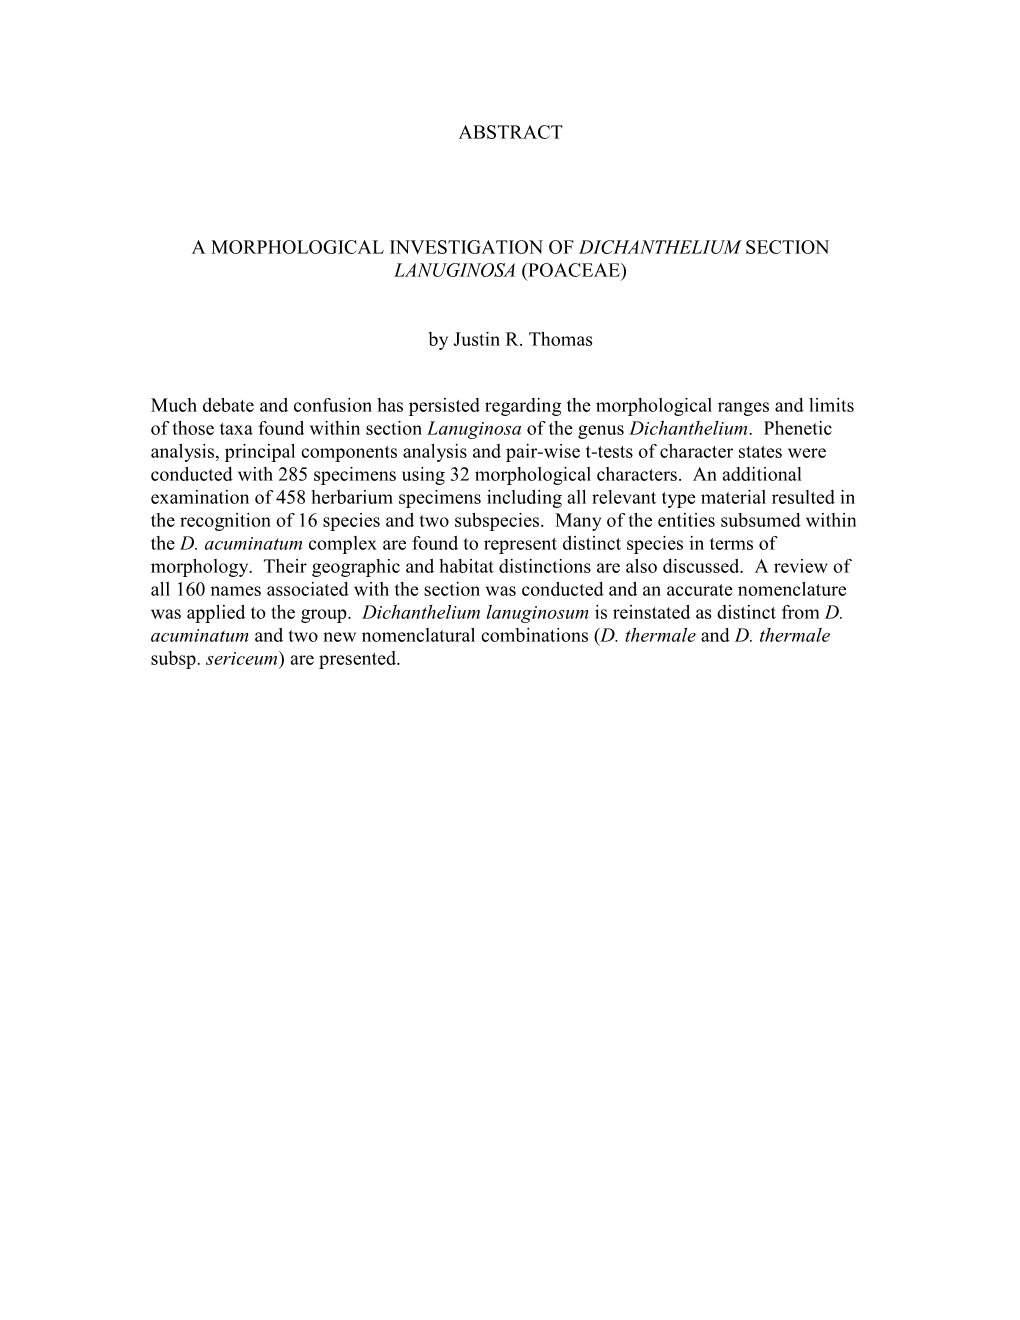 ABSTRACT a MORPHOLOGICAL INVESTIGATION of DICHANTHELIUM SECTION LANUGINOSA (POACEAE) by Justin R. Thomas Much Debate and Confusi